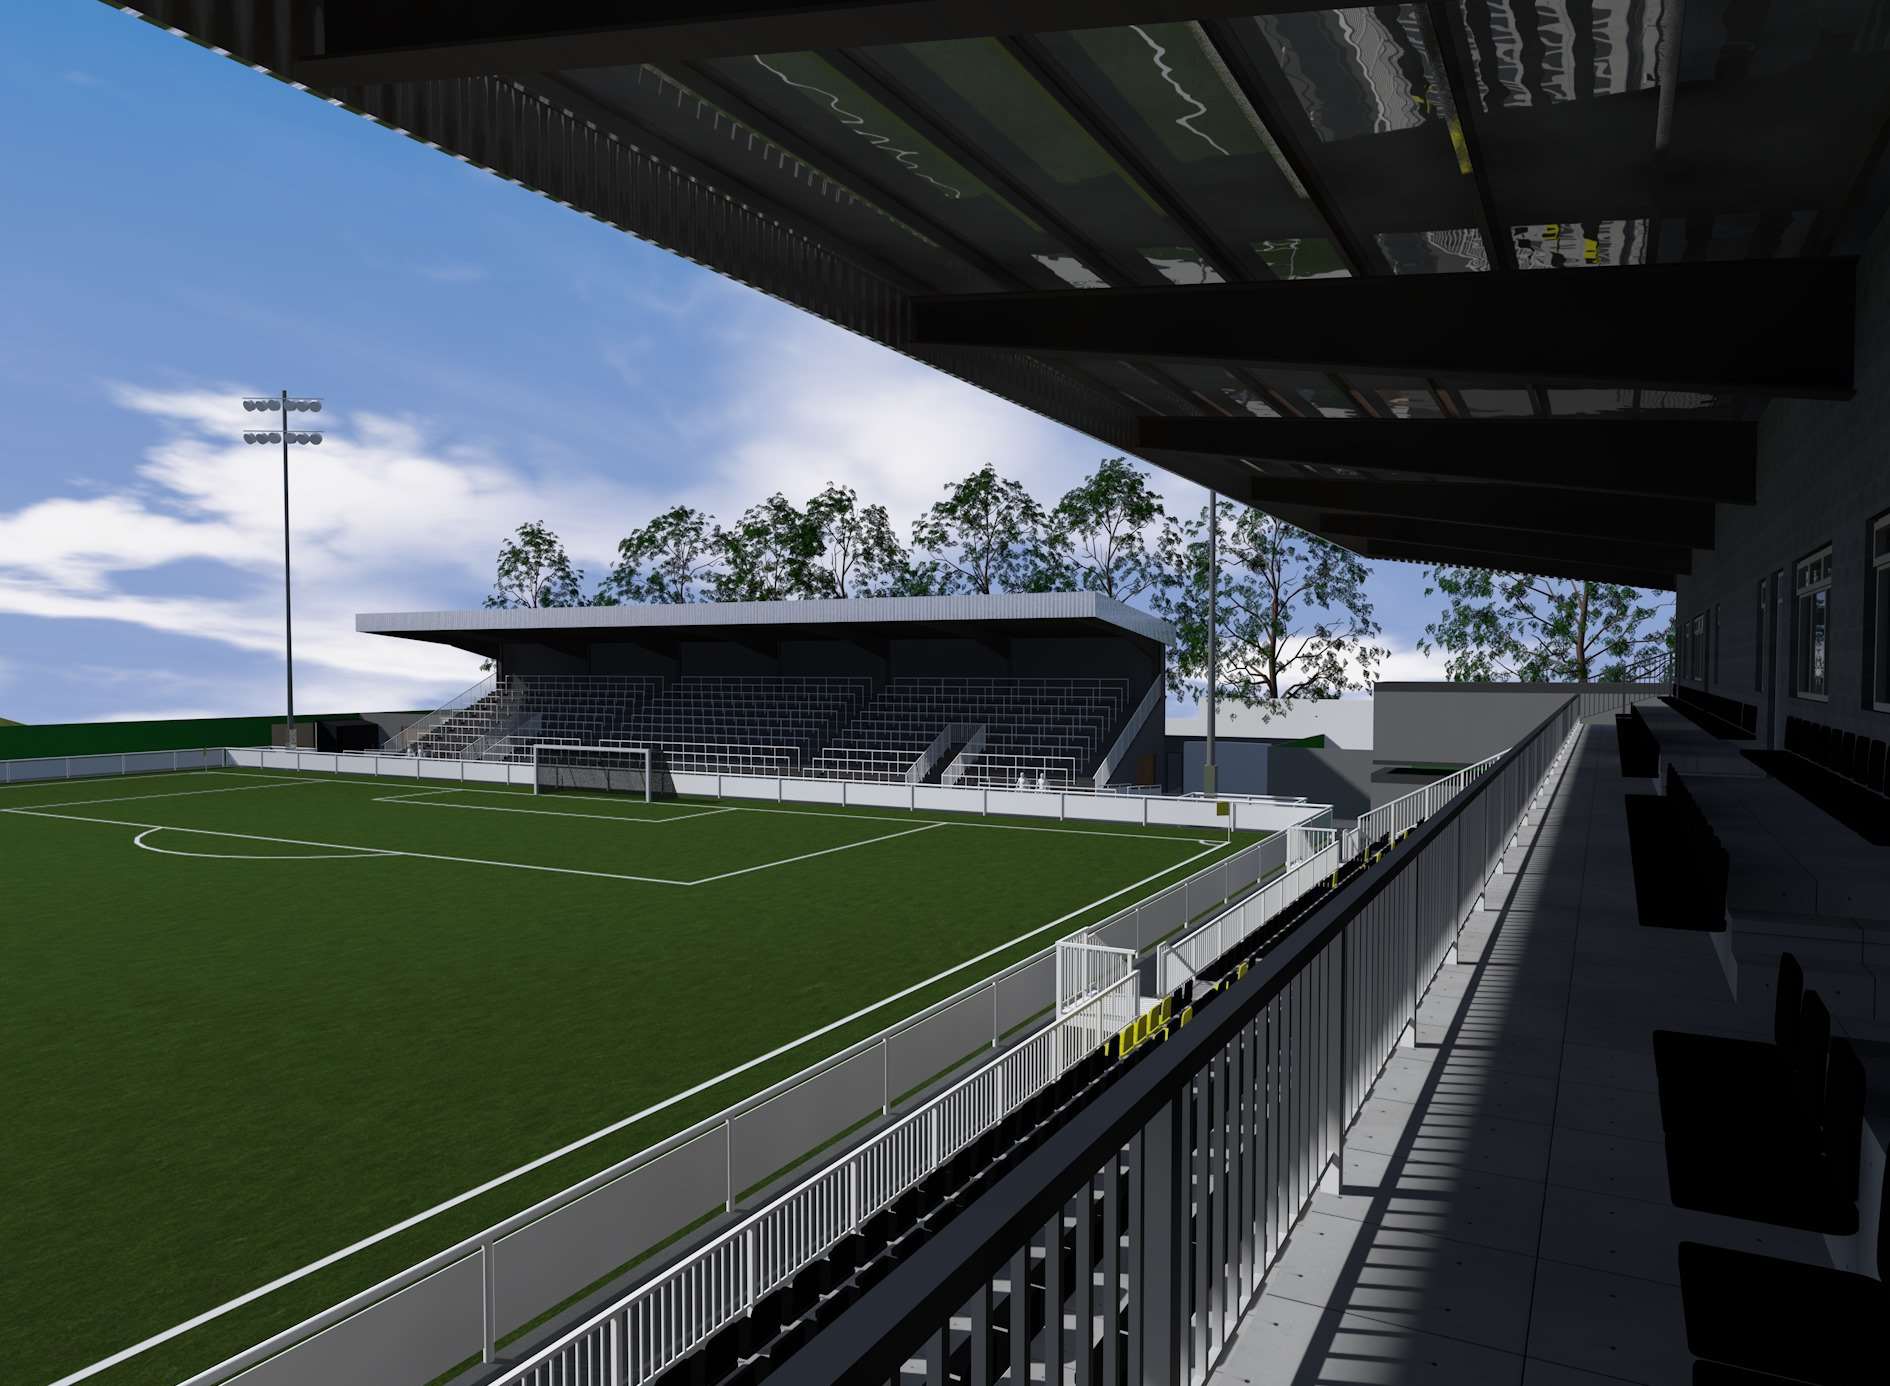 Artist impressions of the new stand at the north end of Maidstone United's Gallagher Stadium